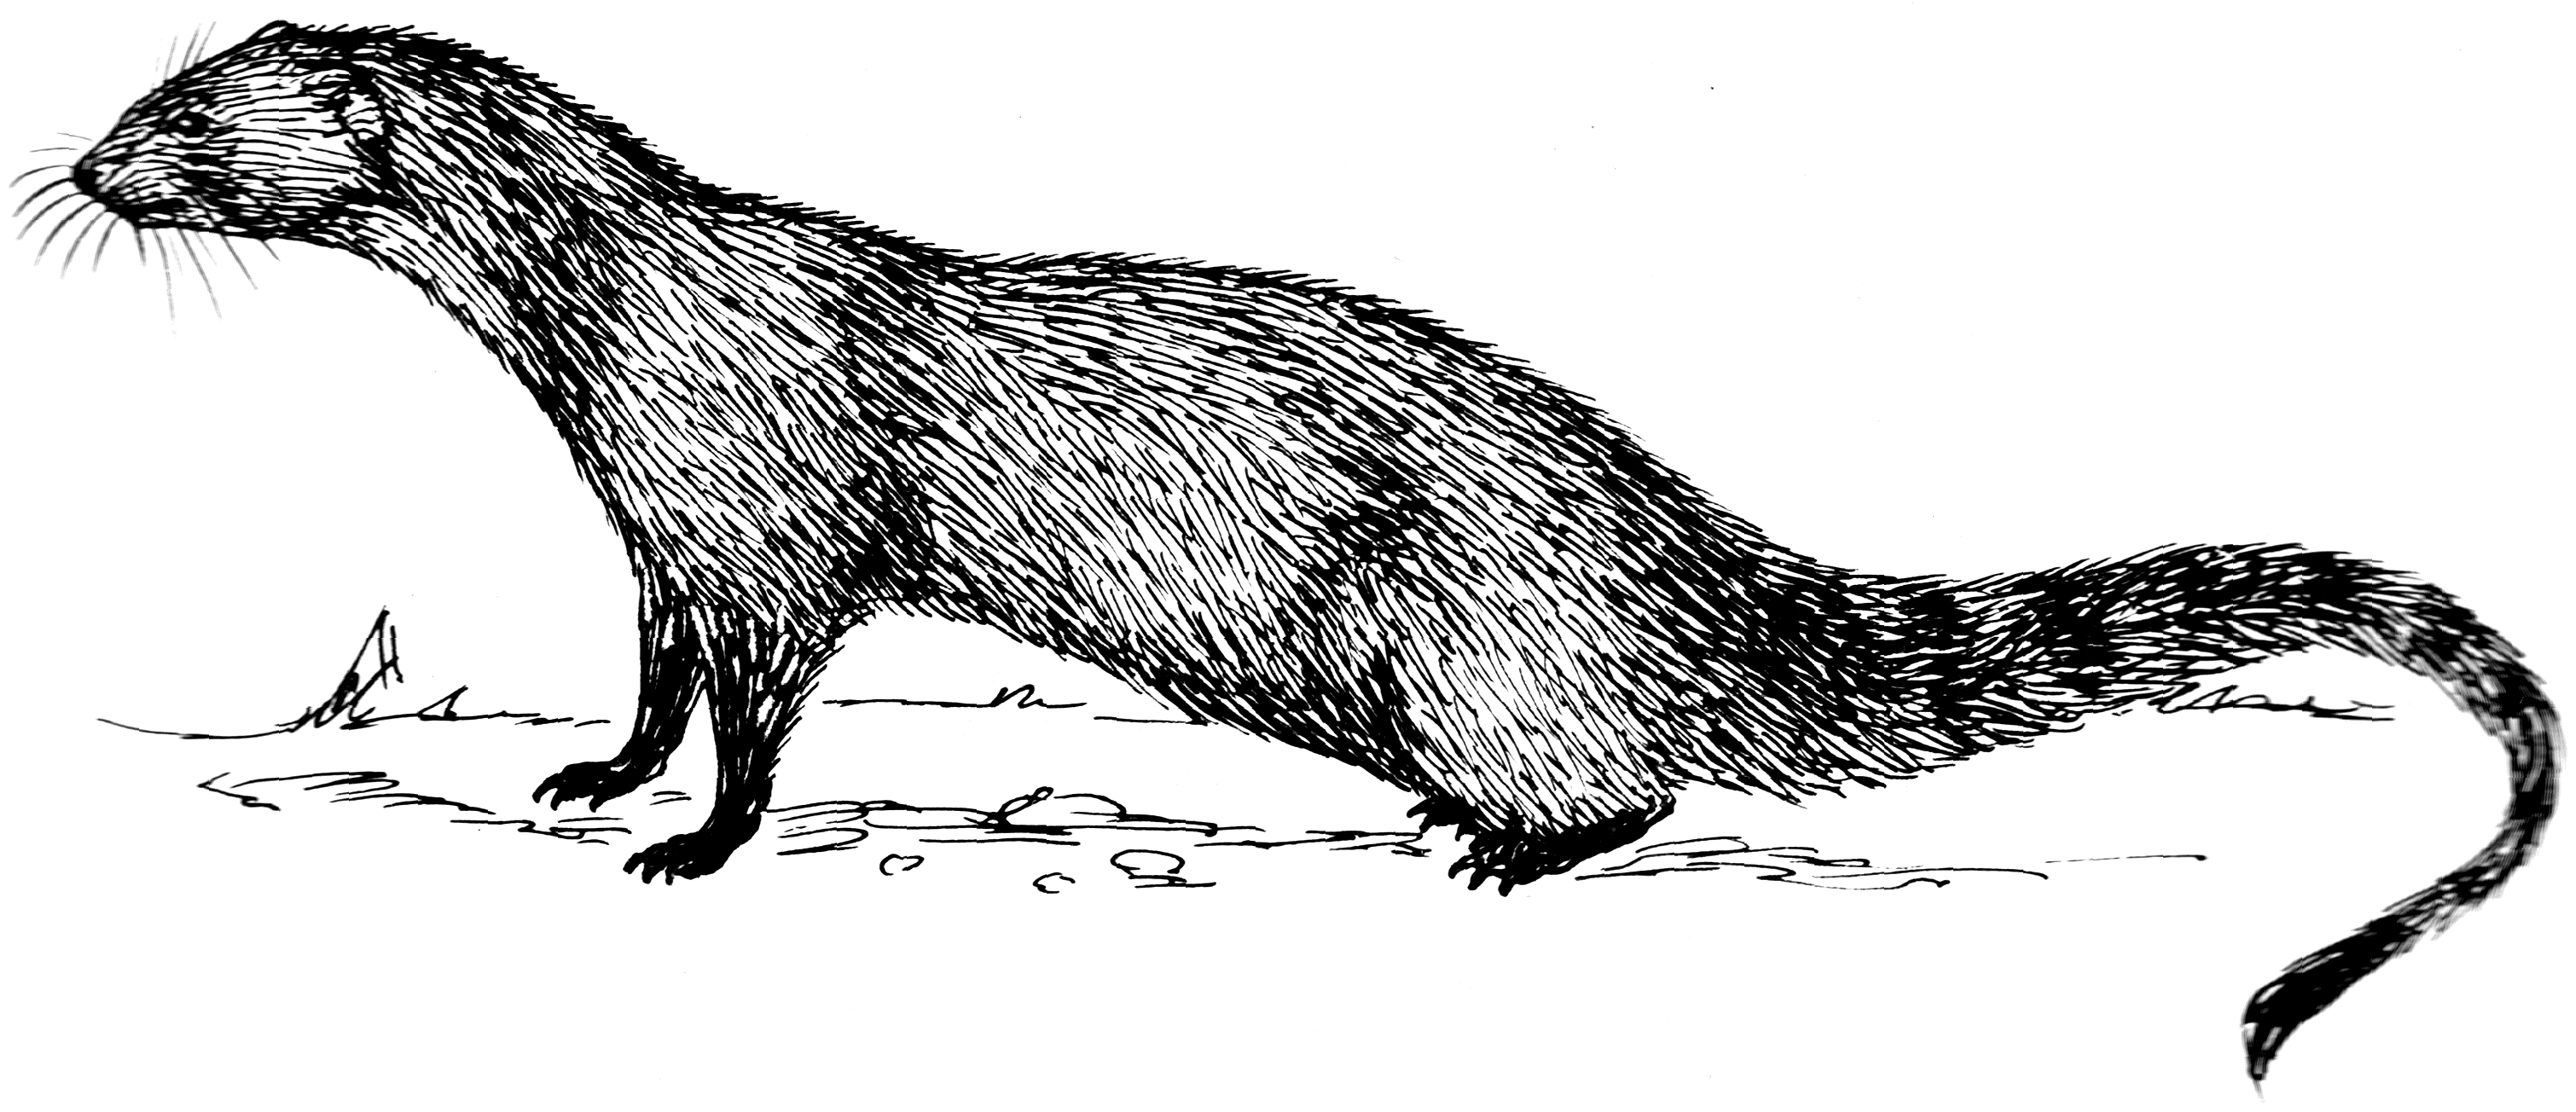 An example of what Gef may have looked like (which is any mongoose). By Pearson Scott Foresman [Public domain], via Wikimedia Commons